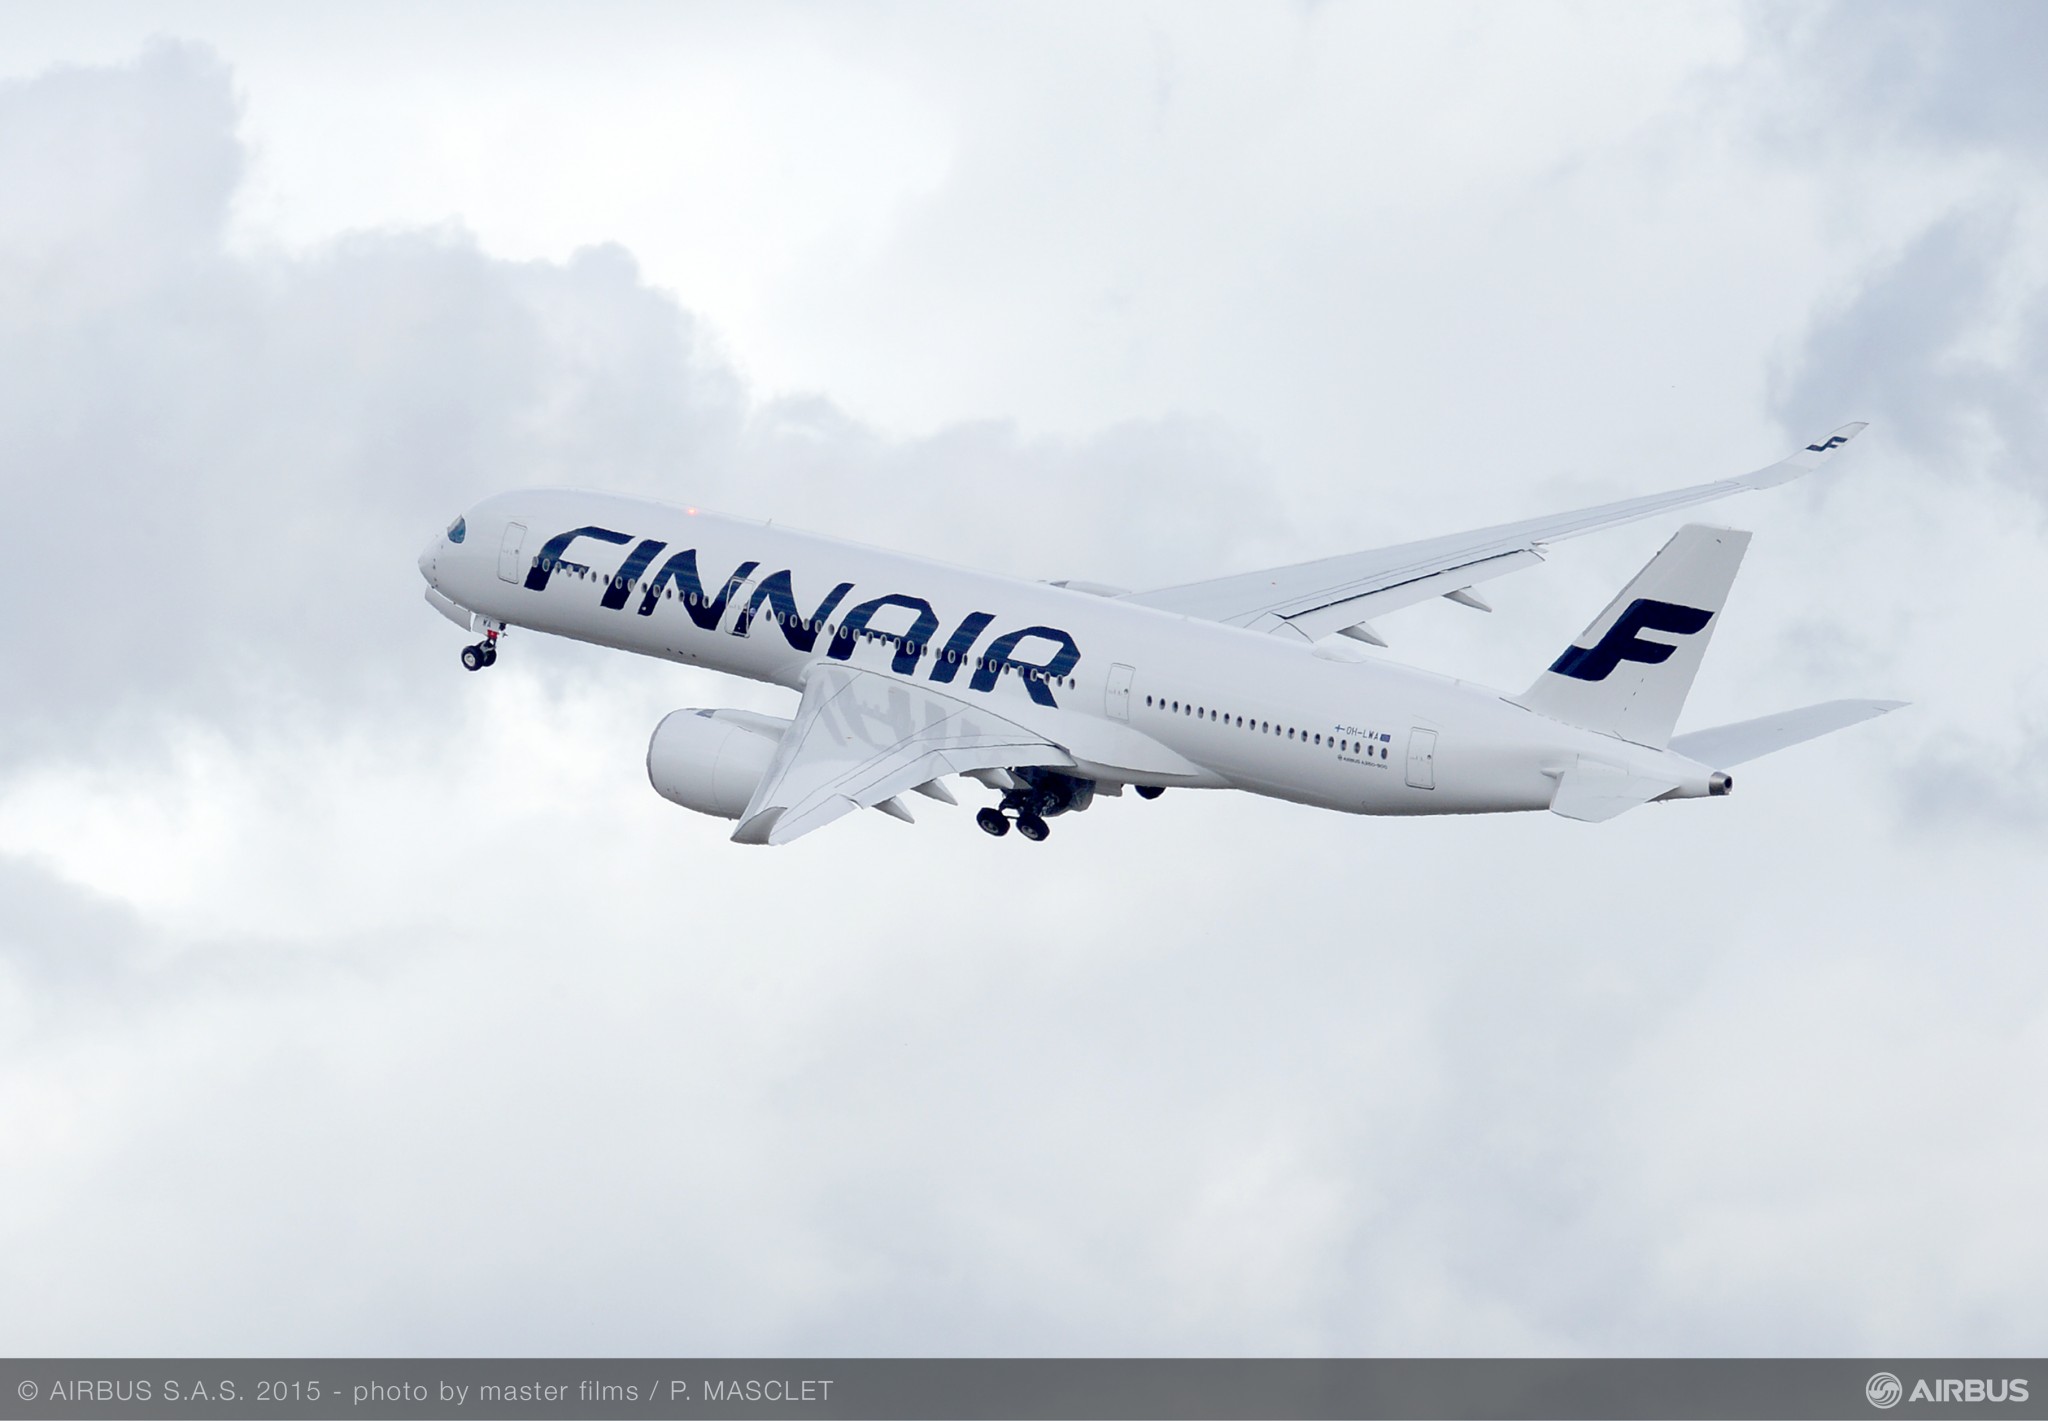 Finnair launches €500 million rights issue